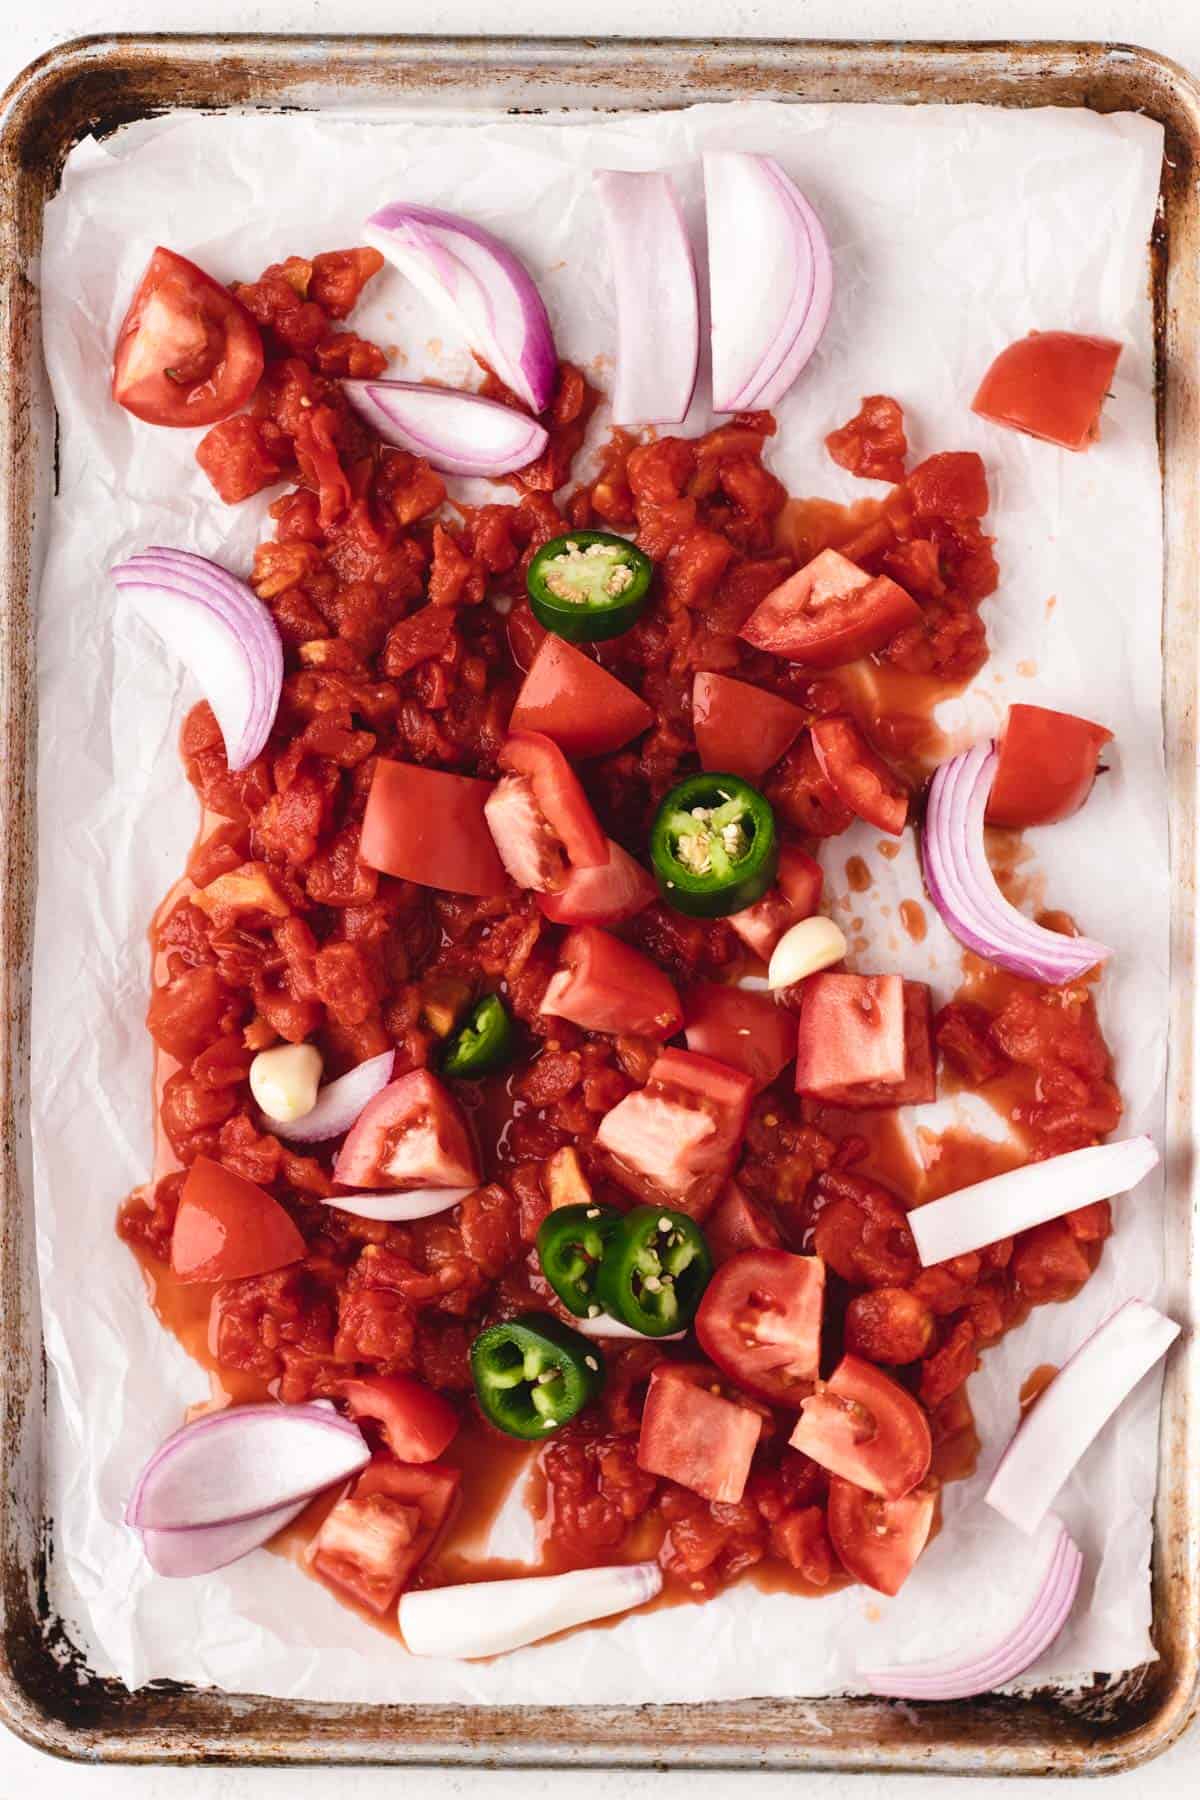 A sheet pan filled with salsa ingredients arranged in a single layer, ready to be roasted in the oven.